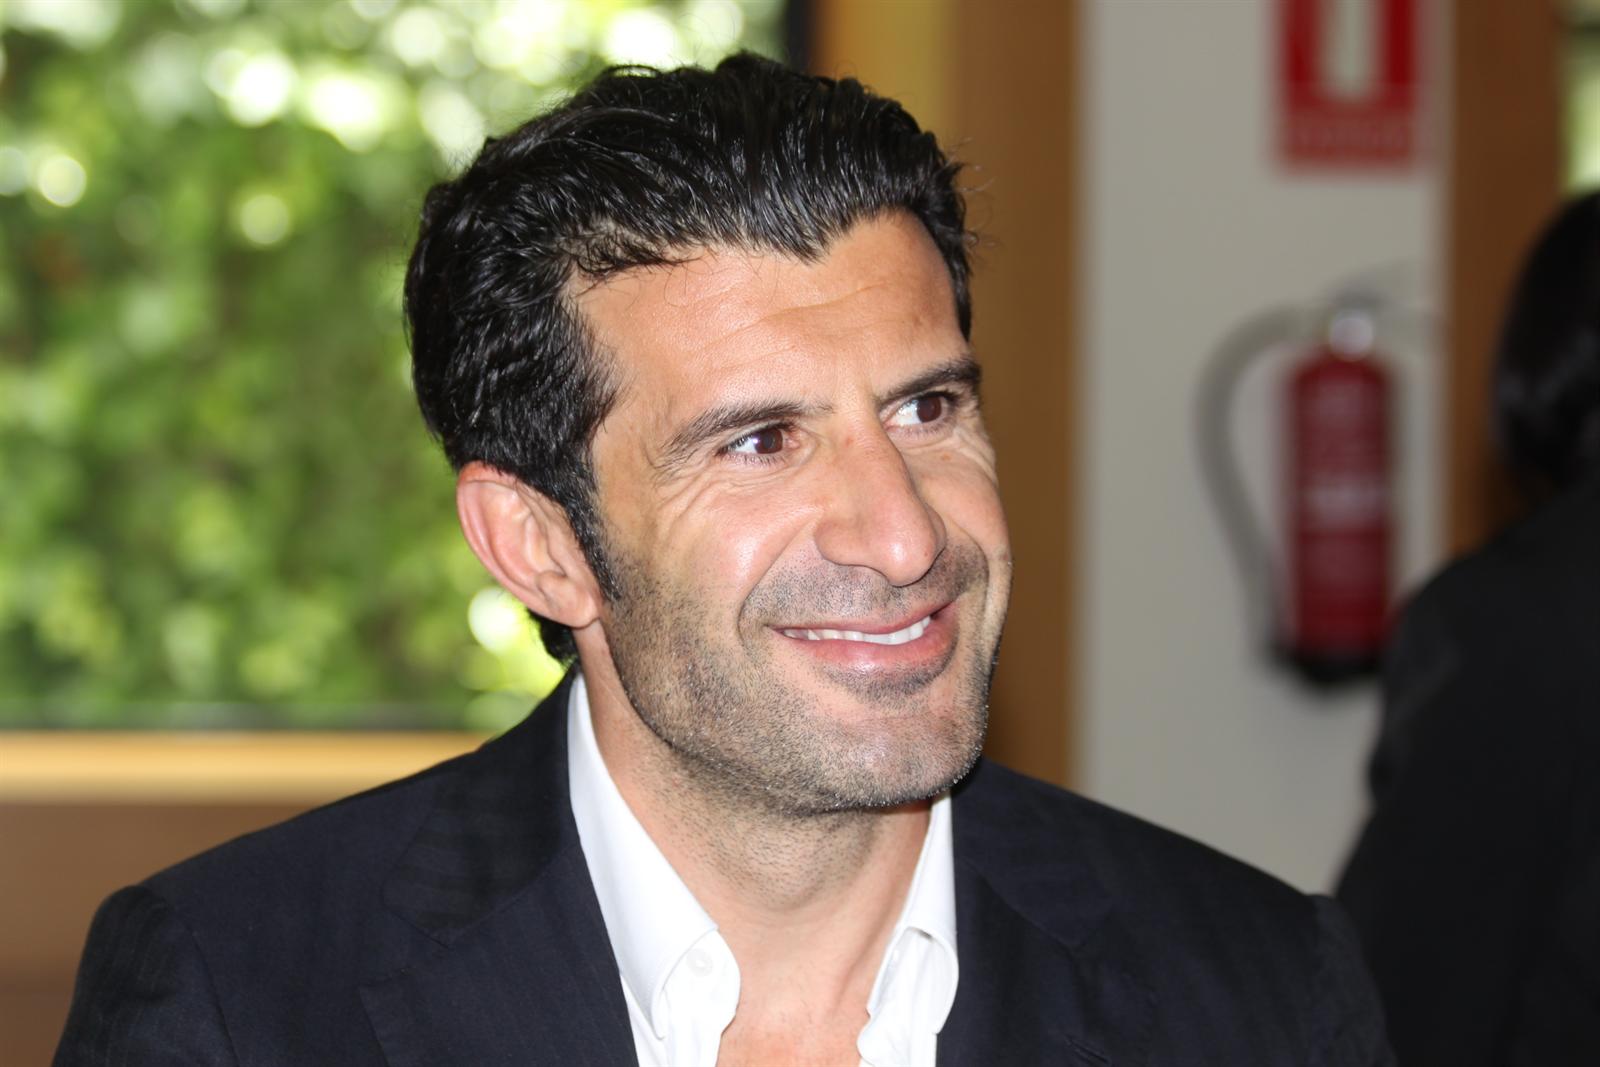 Former Portuguese international Luis Figo has announced that he will stand for FIFA President ©Getty Images